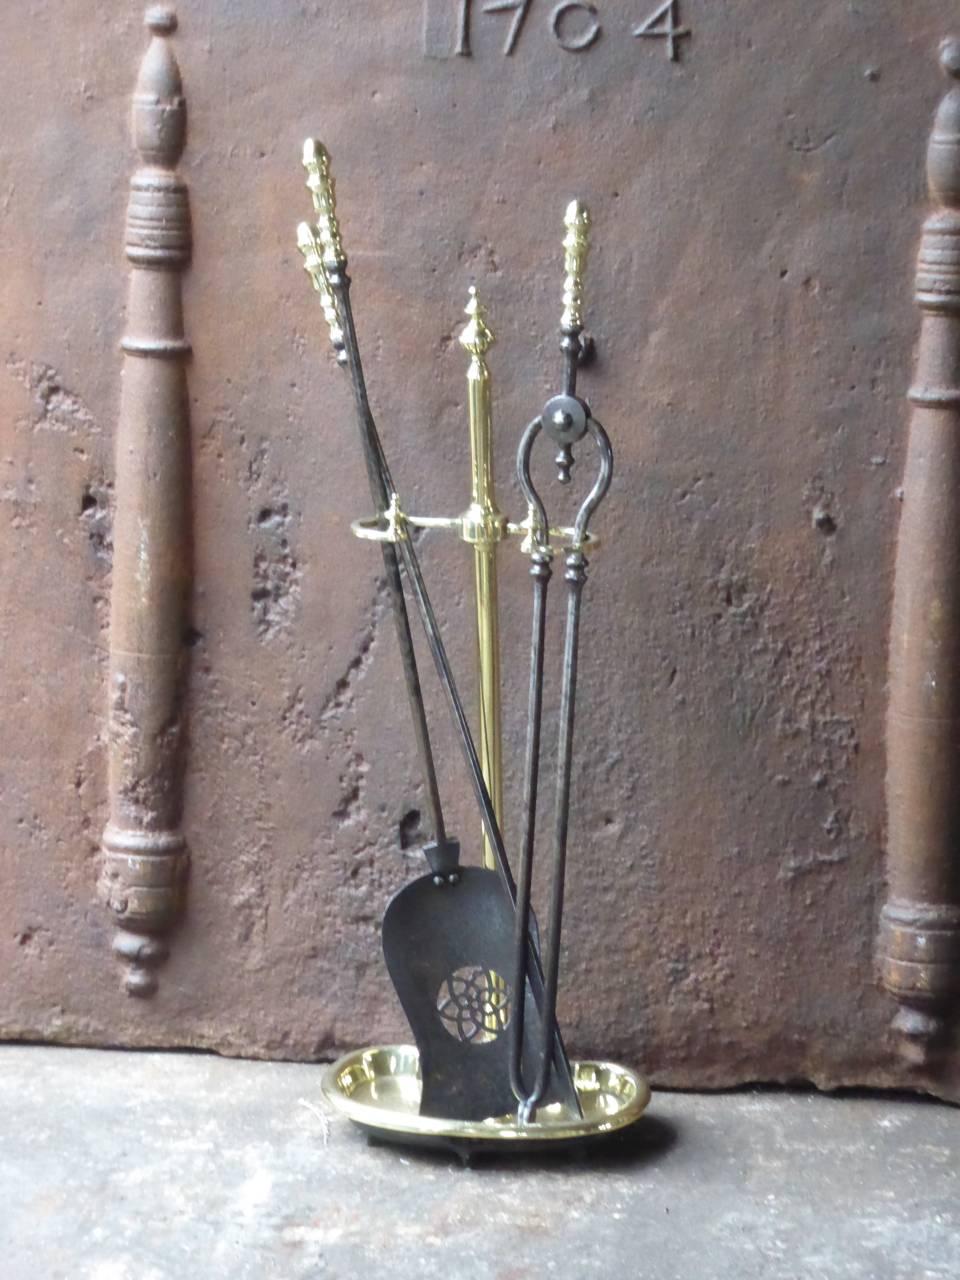 19th century English fireplace tool set - fire irons made of wrought iron and polished brass.

We have a unique and specialized collection of antique and used fireplace accessories consisting of more than 1000 listings at 1stdibs. Amongst others, we